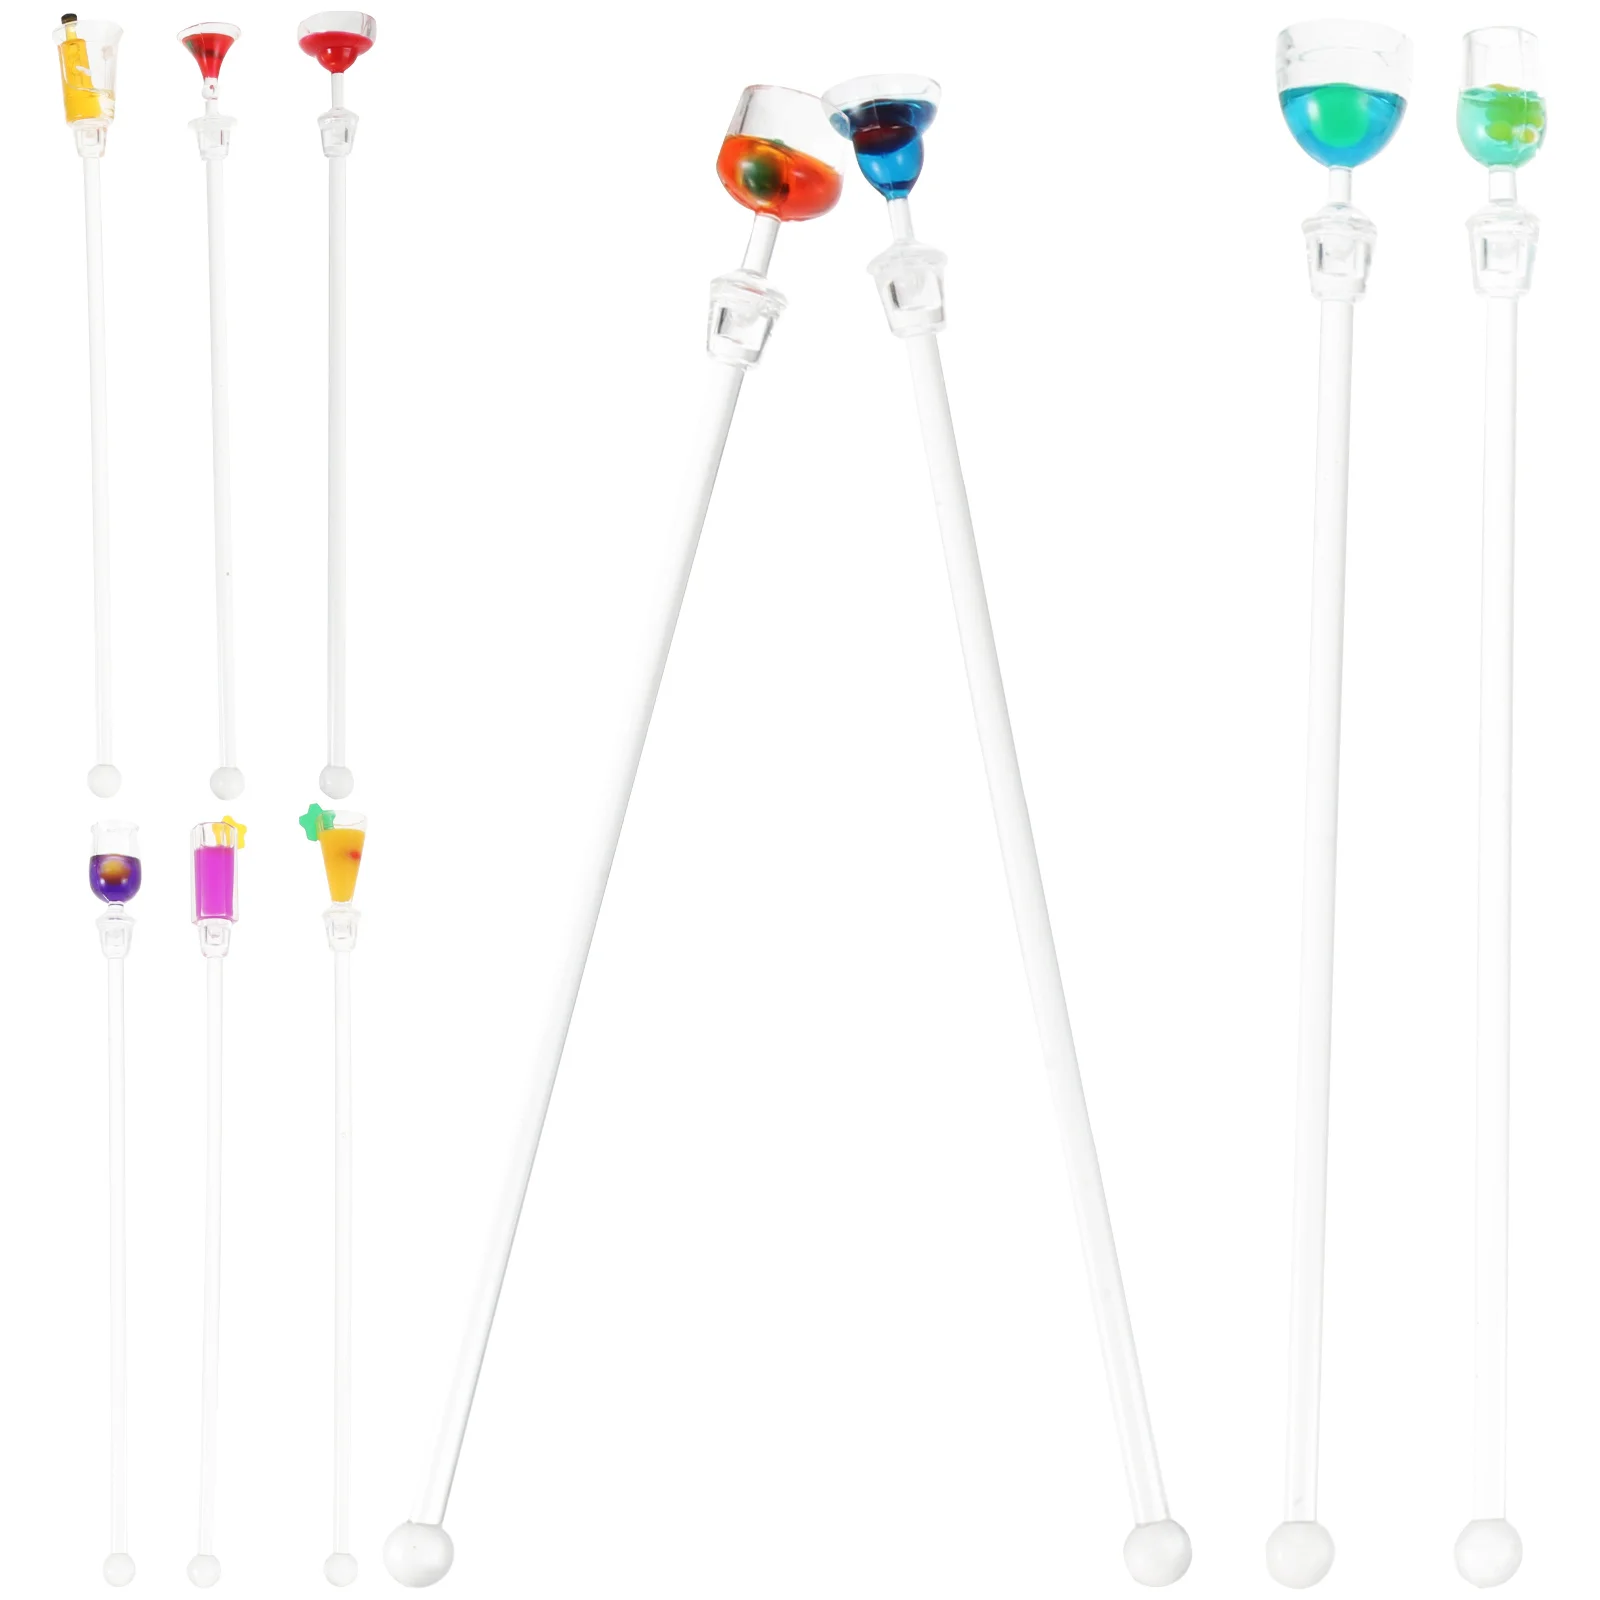 

OUNONA 10pcs 23CM Cocktail Drink Mixer Bar Stirring Mixing Sticks with Colorful Miniature Accessory (Random Color) Shaker